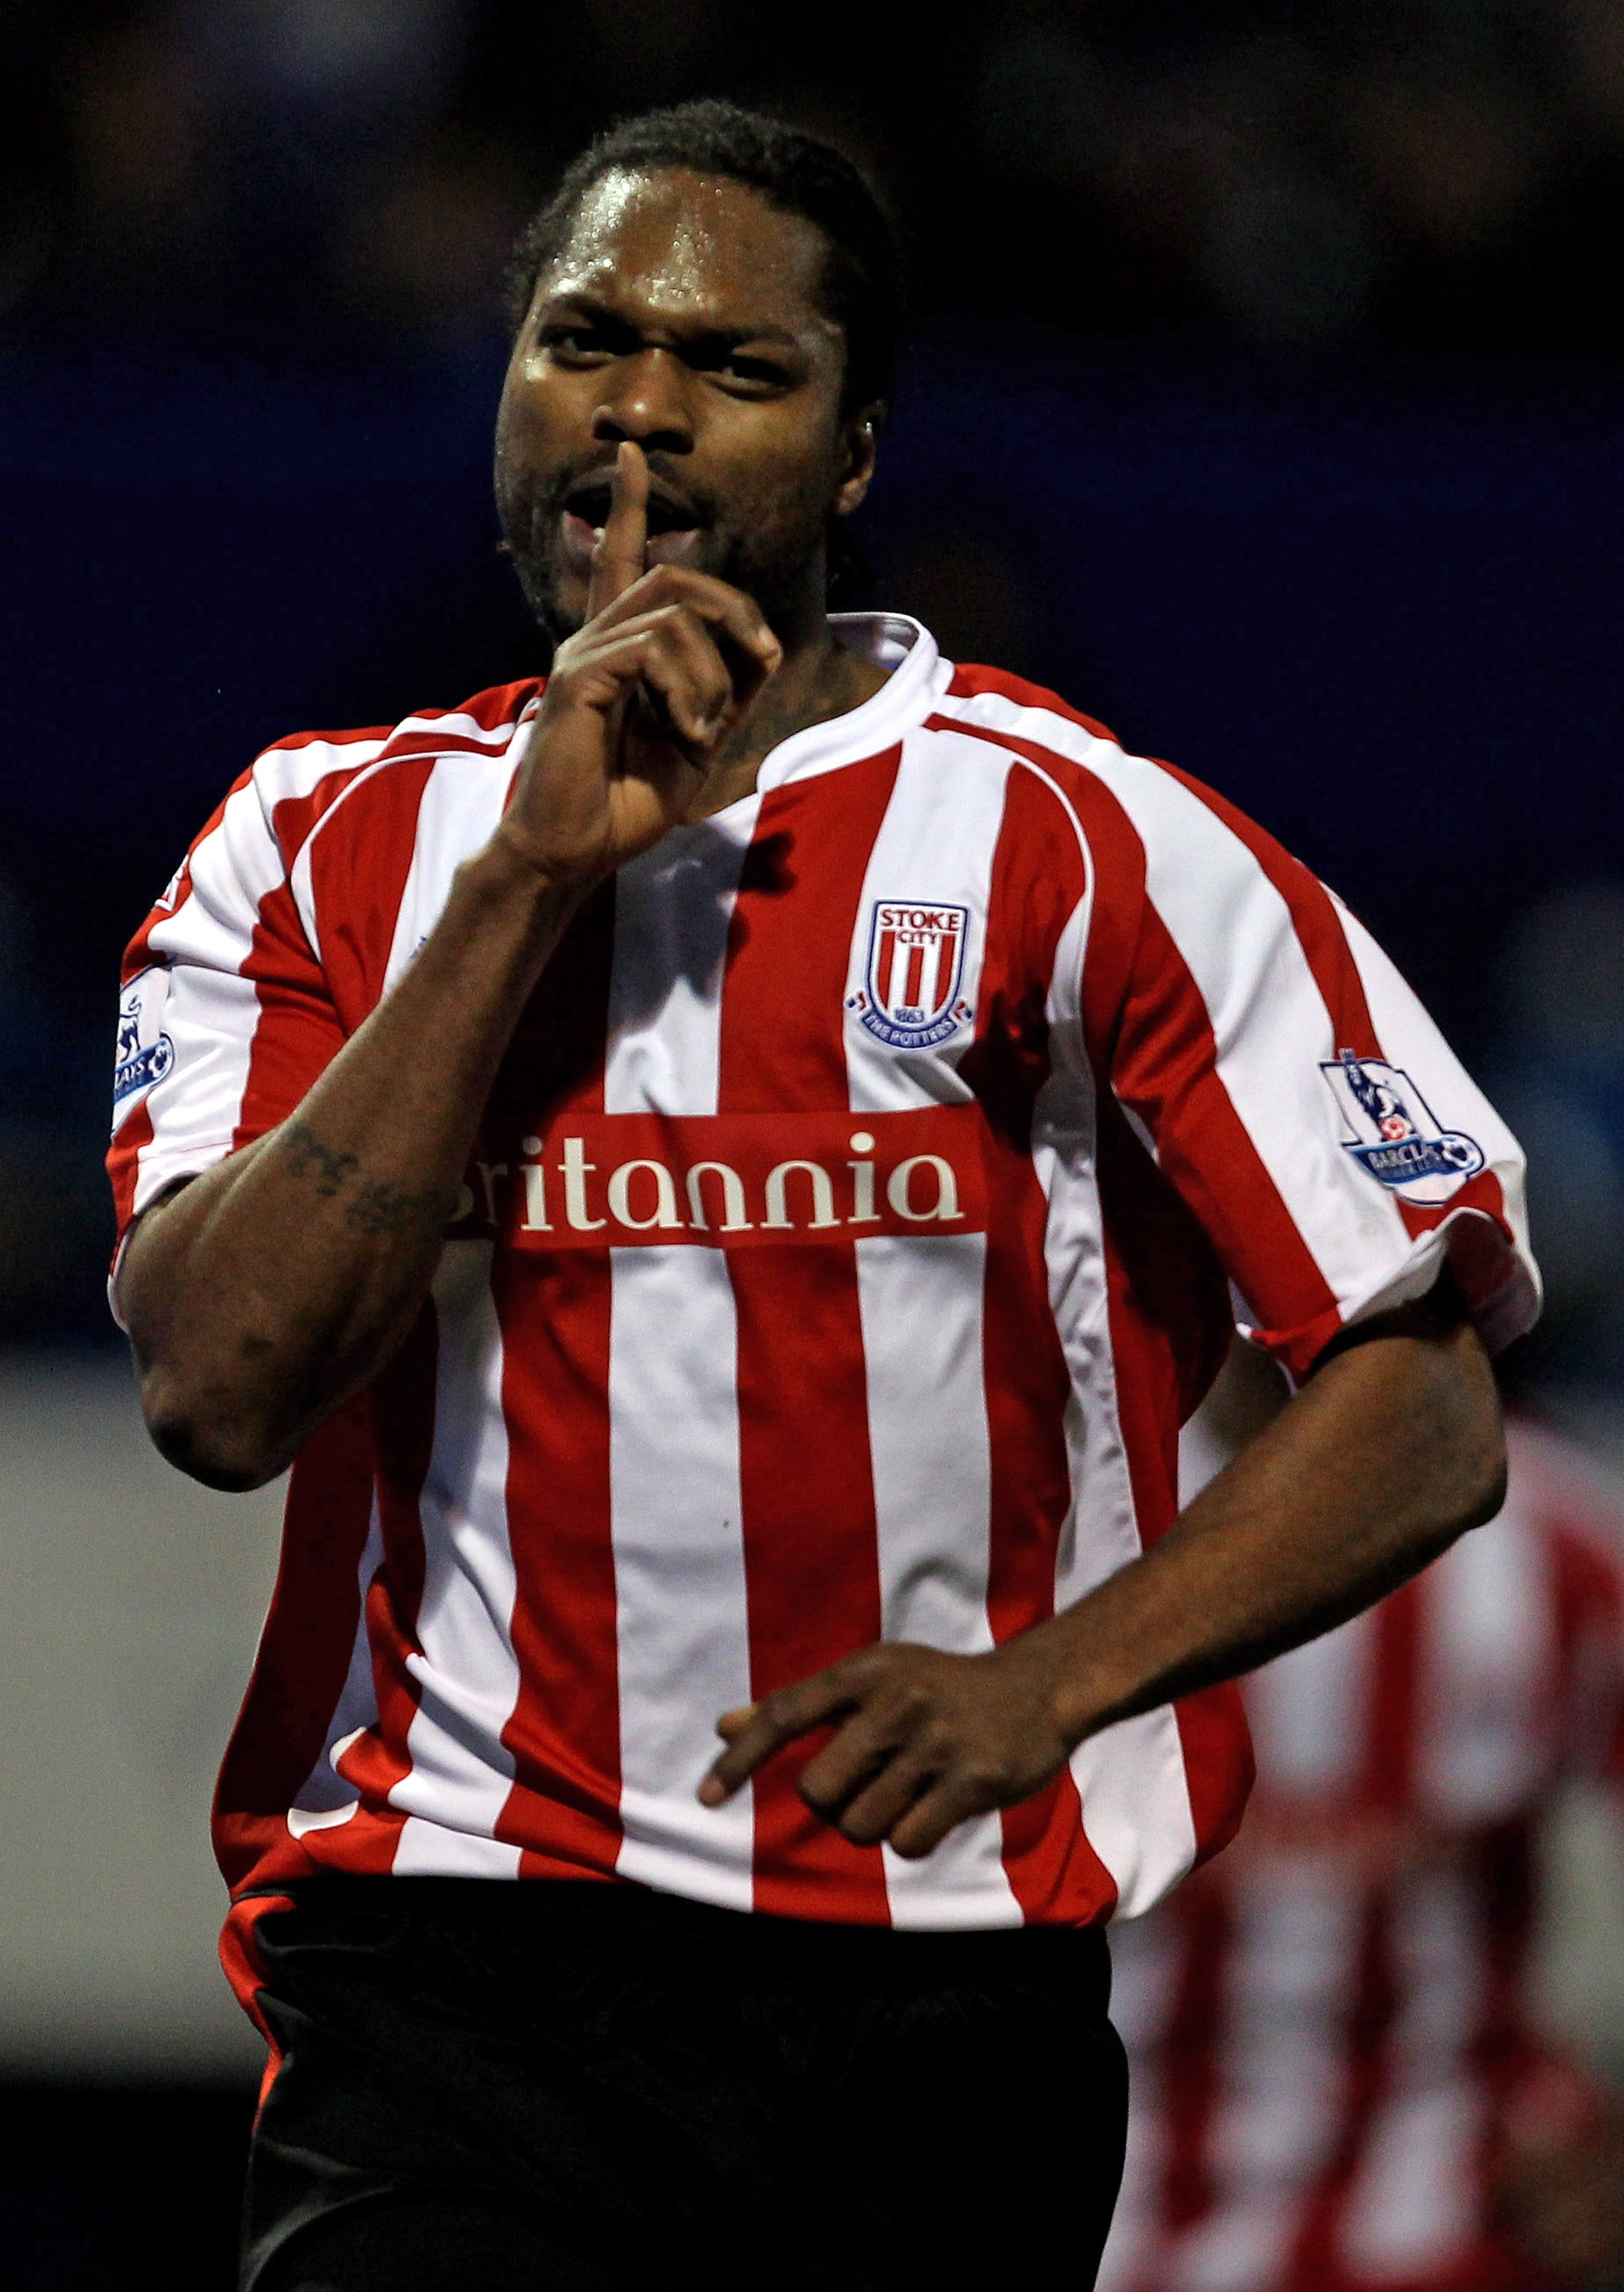 PORTSMOUTH, ENGLAND - FEBRUARY 20:  Salif Diao of Stoke City celebrates scoring the winning goal during the Barclays Premier League match between Portsmouth and Stoke City at Fratton Park on February 20, 2010 in Portsmouth, England.  (Photo by Bryn Lennon